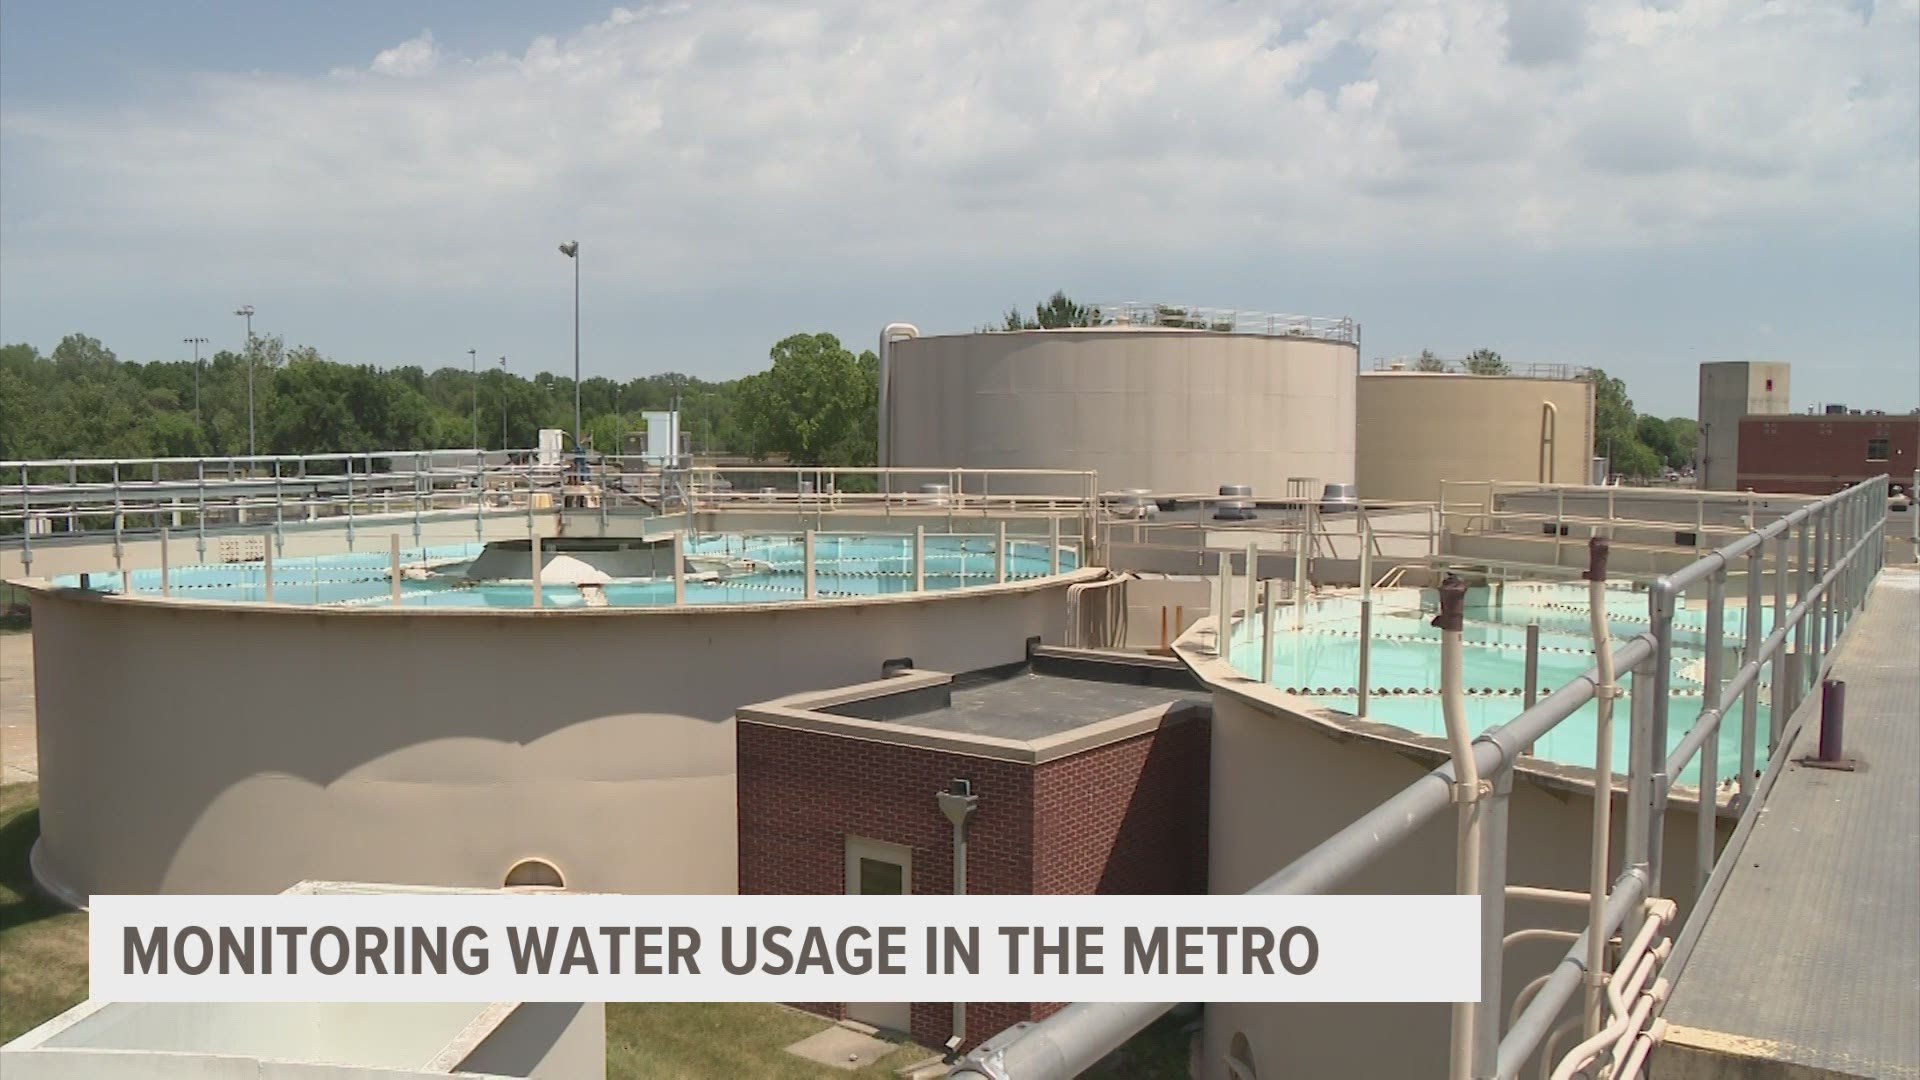 West Des Moines Water Works is able to monitor customer's usage in real-time. They're not looking at who's using too much water, but for irregularities.